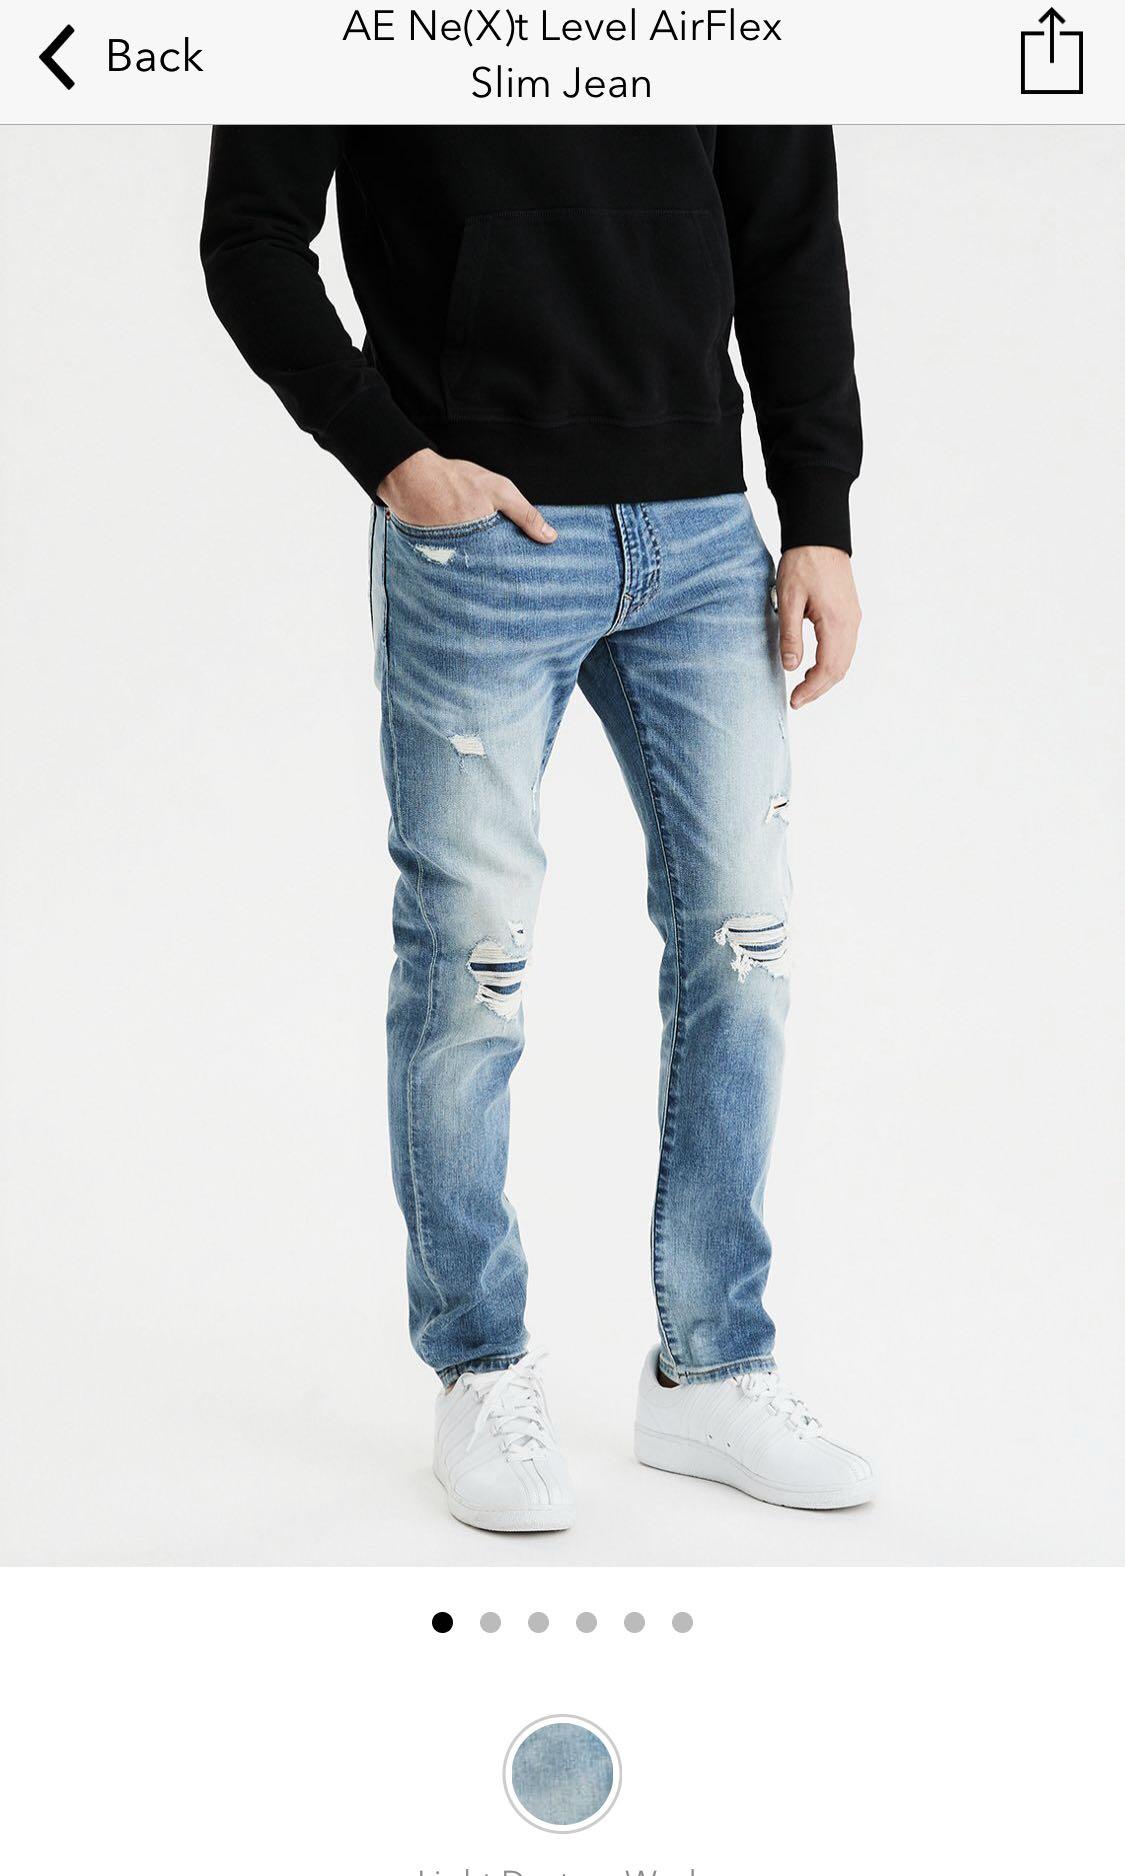 https://media.karousell.com/media/photos/products/2019/11/24/american_eagle_ripped_jeans_1574579514_23a72ac4_progressive.jpg